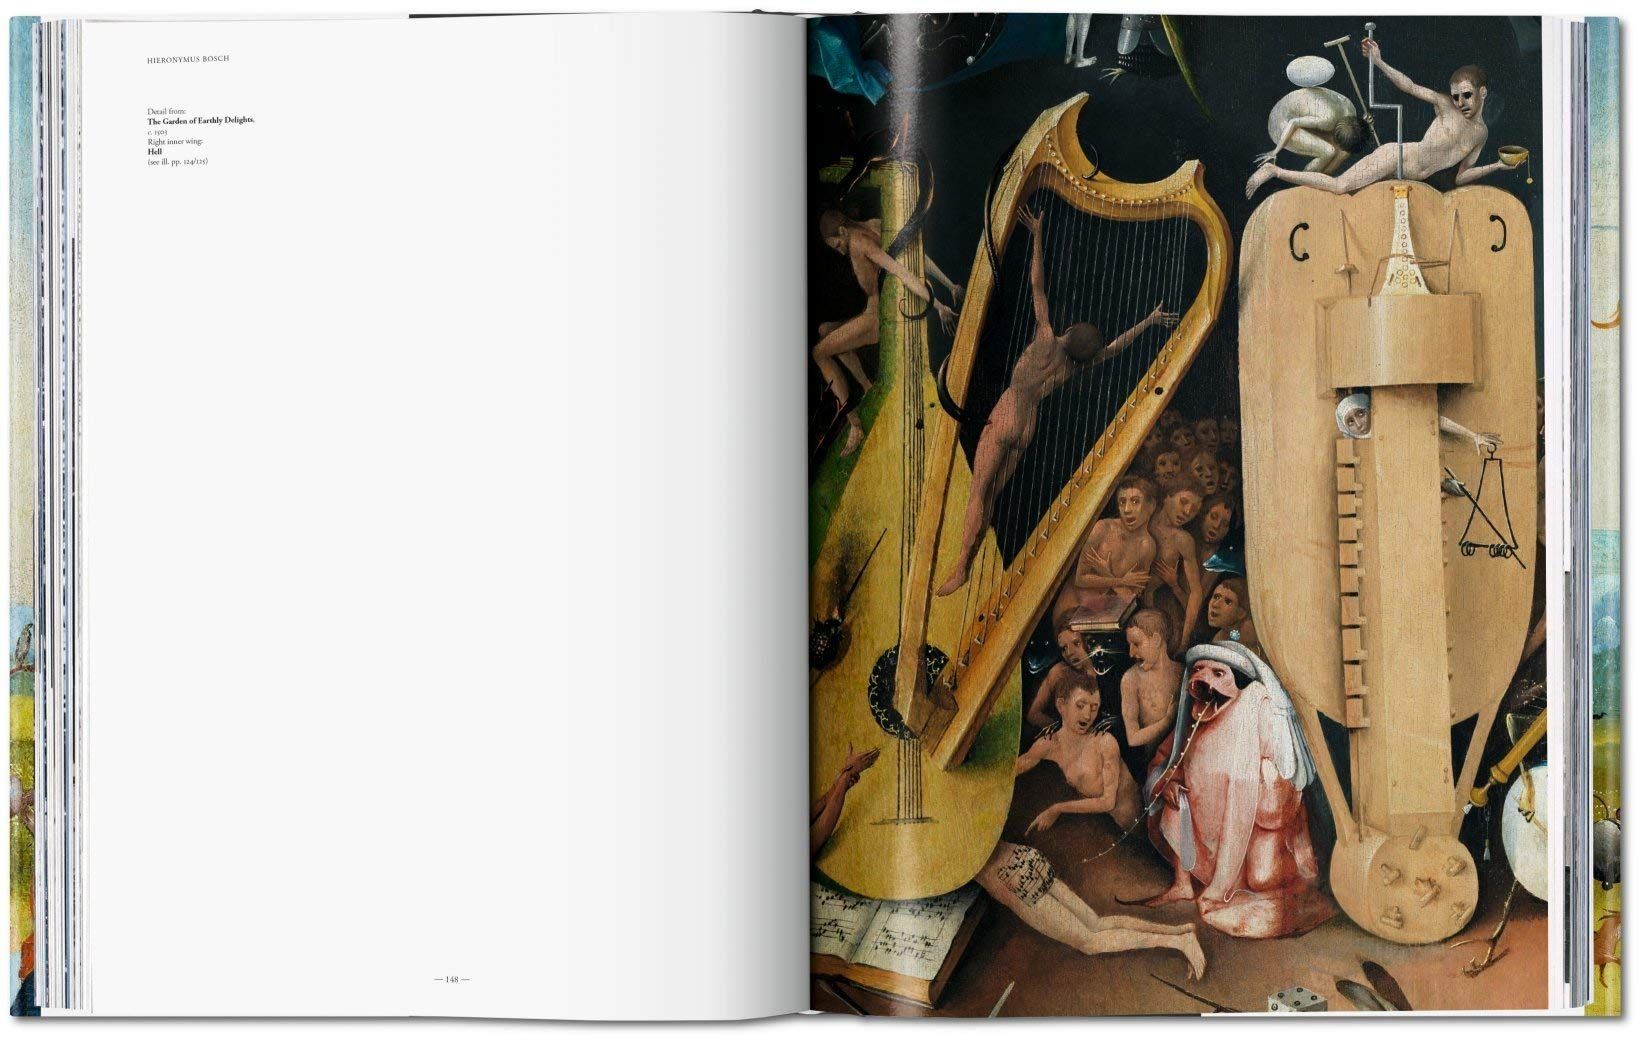 Hieronymus Bosch. The complete works – ARTBOOK